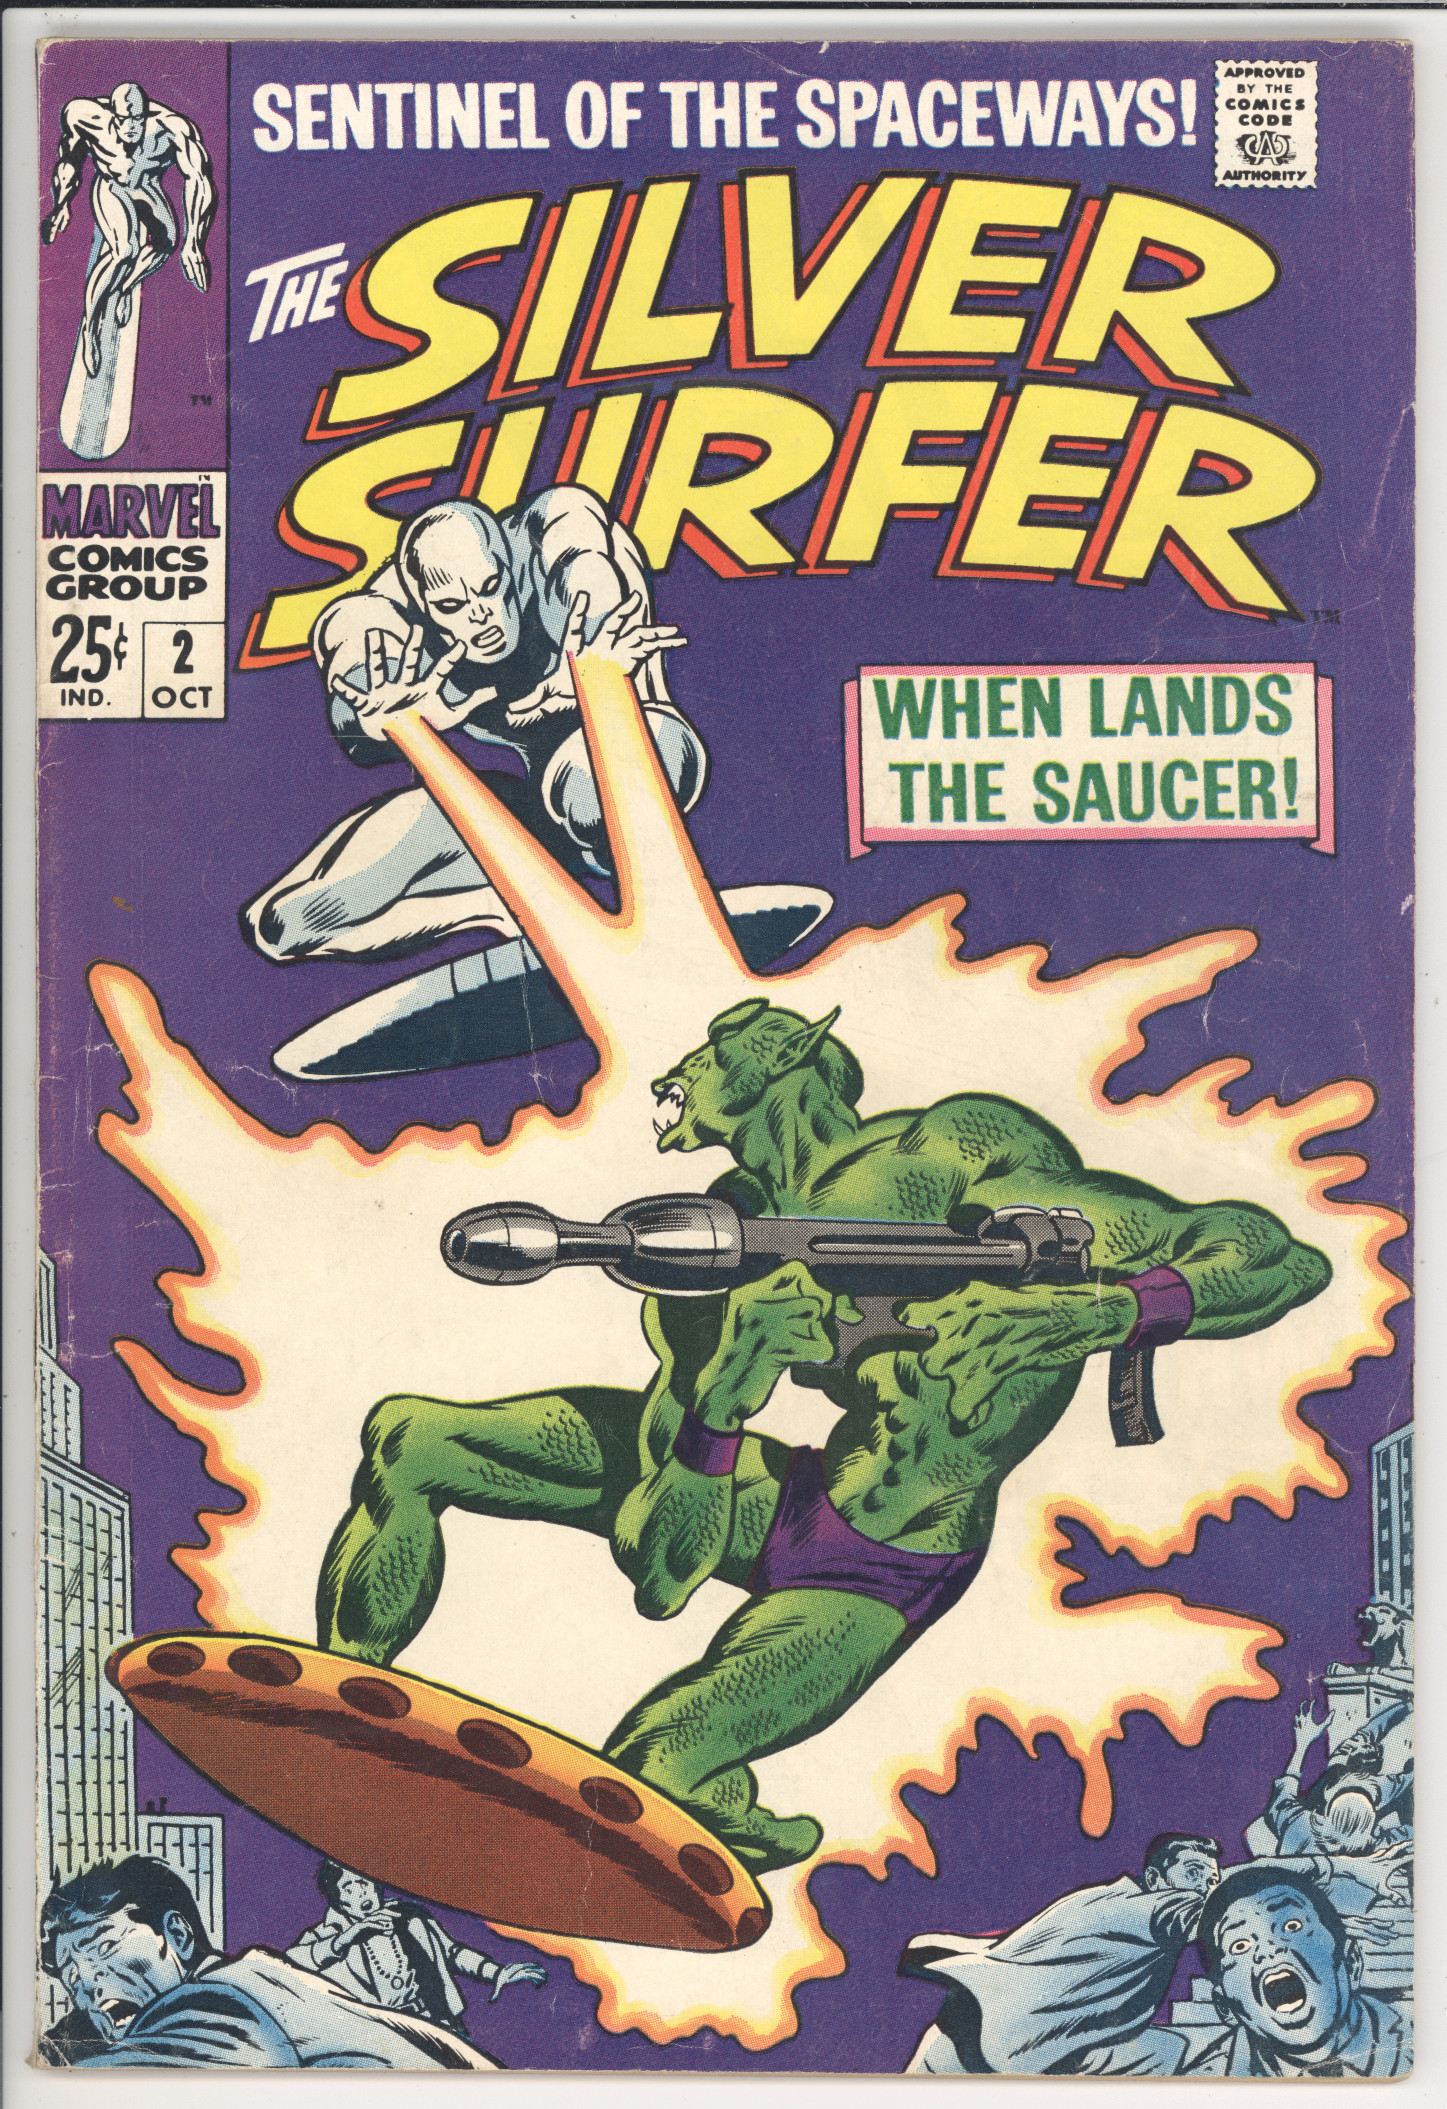 Silver Surfer #2 front